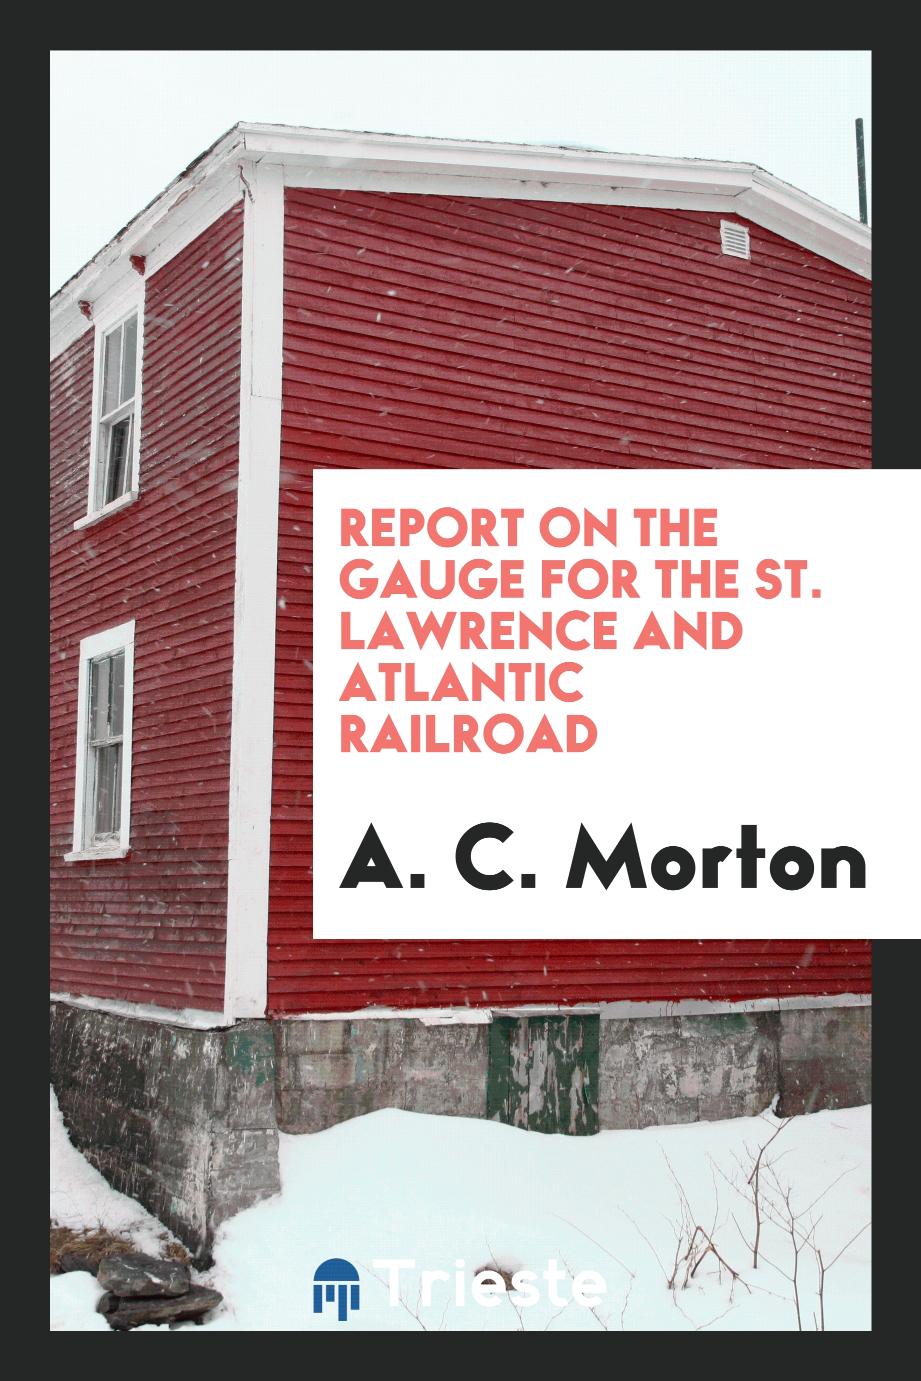 Report on the gauge for the St. Lawrence and Atlantic railroad